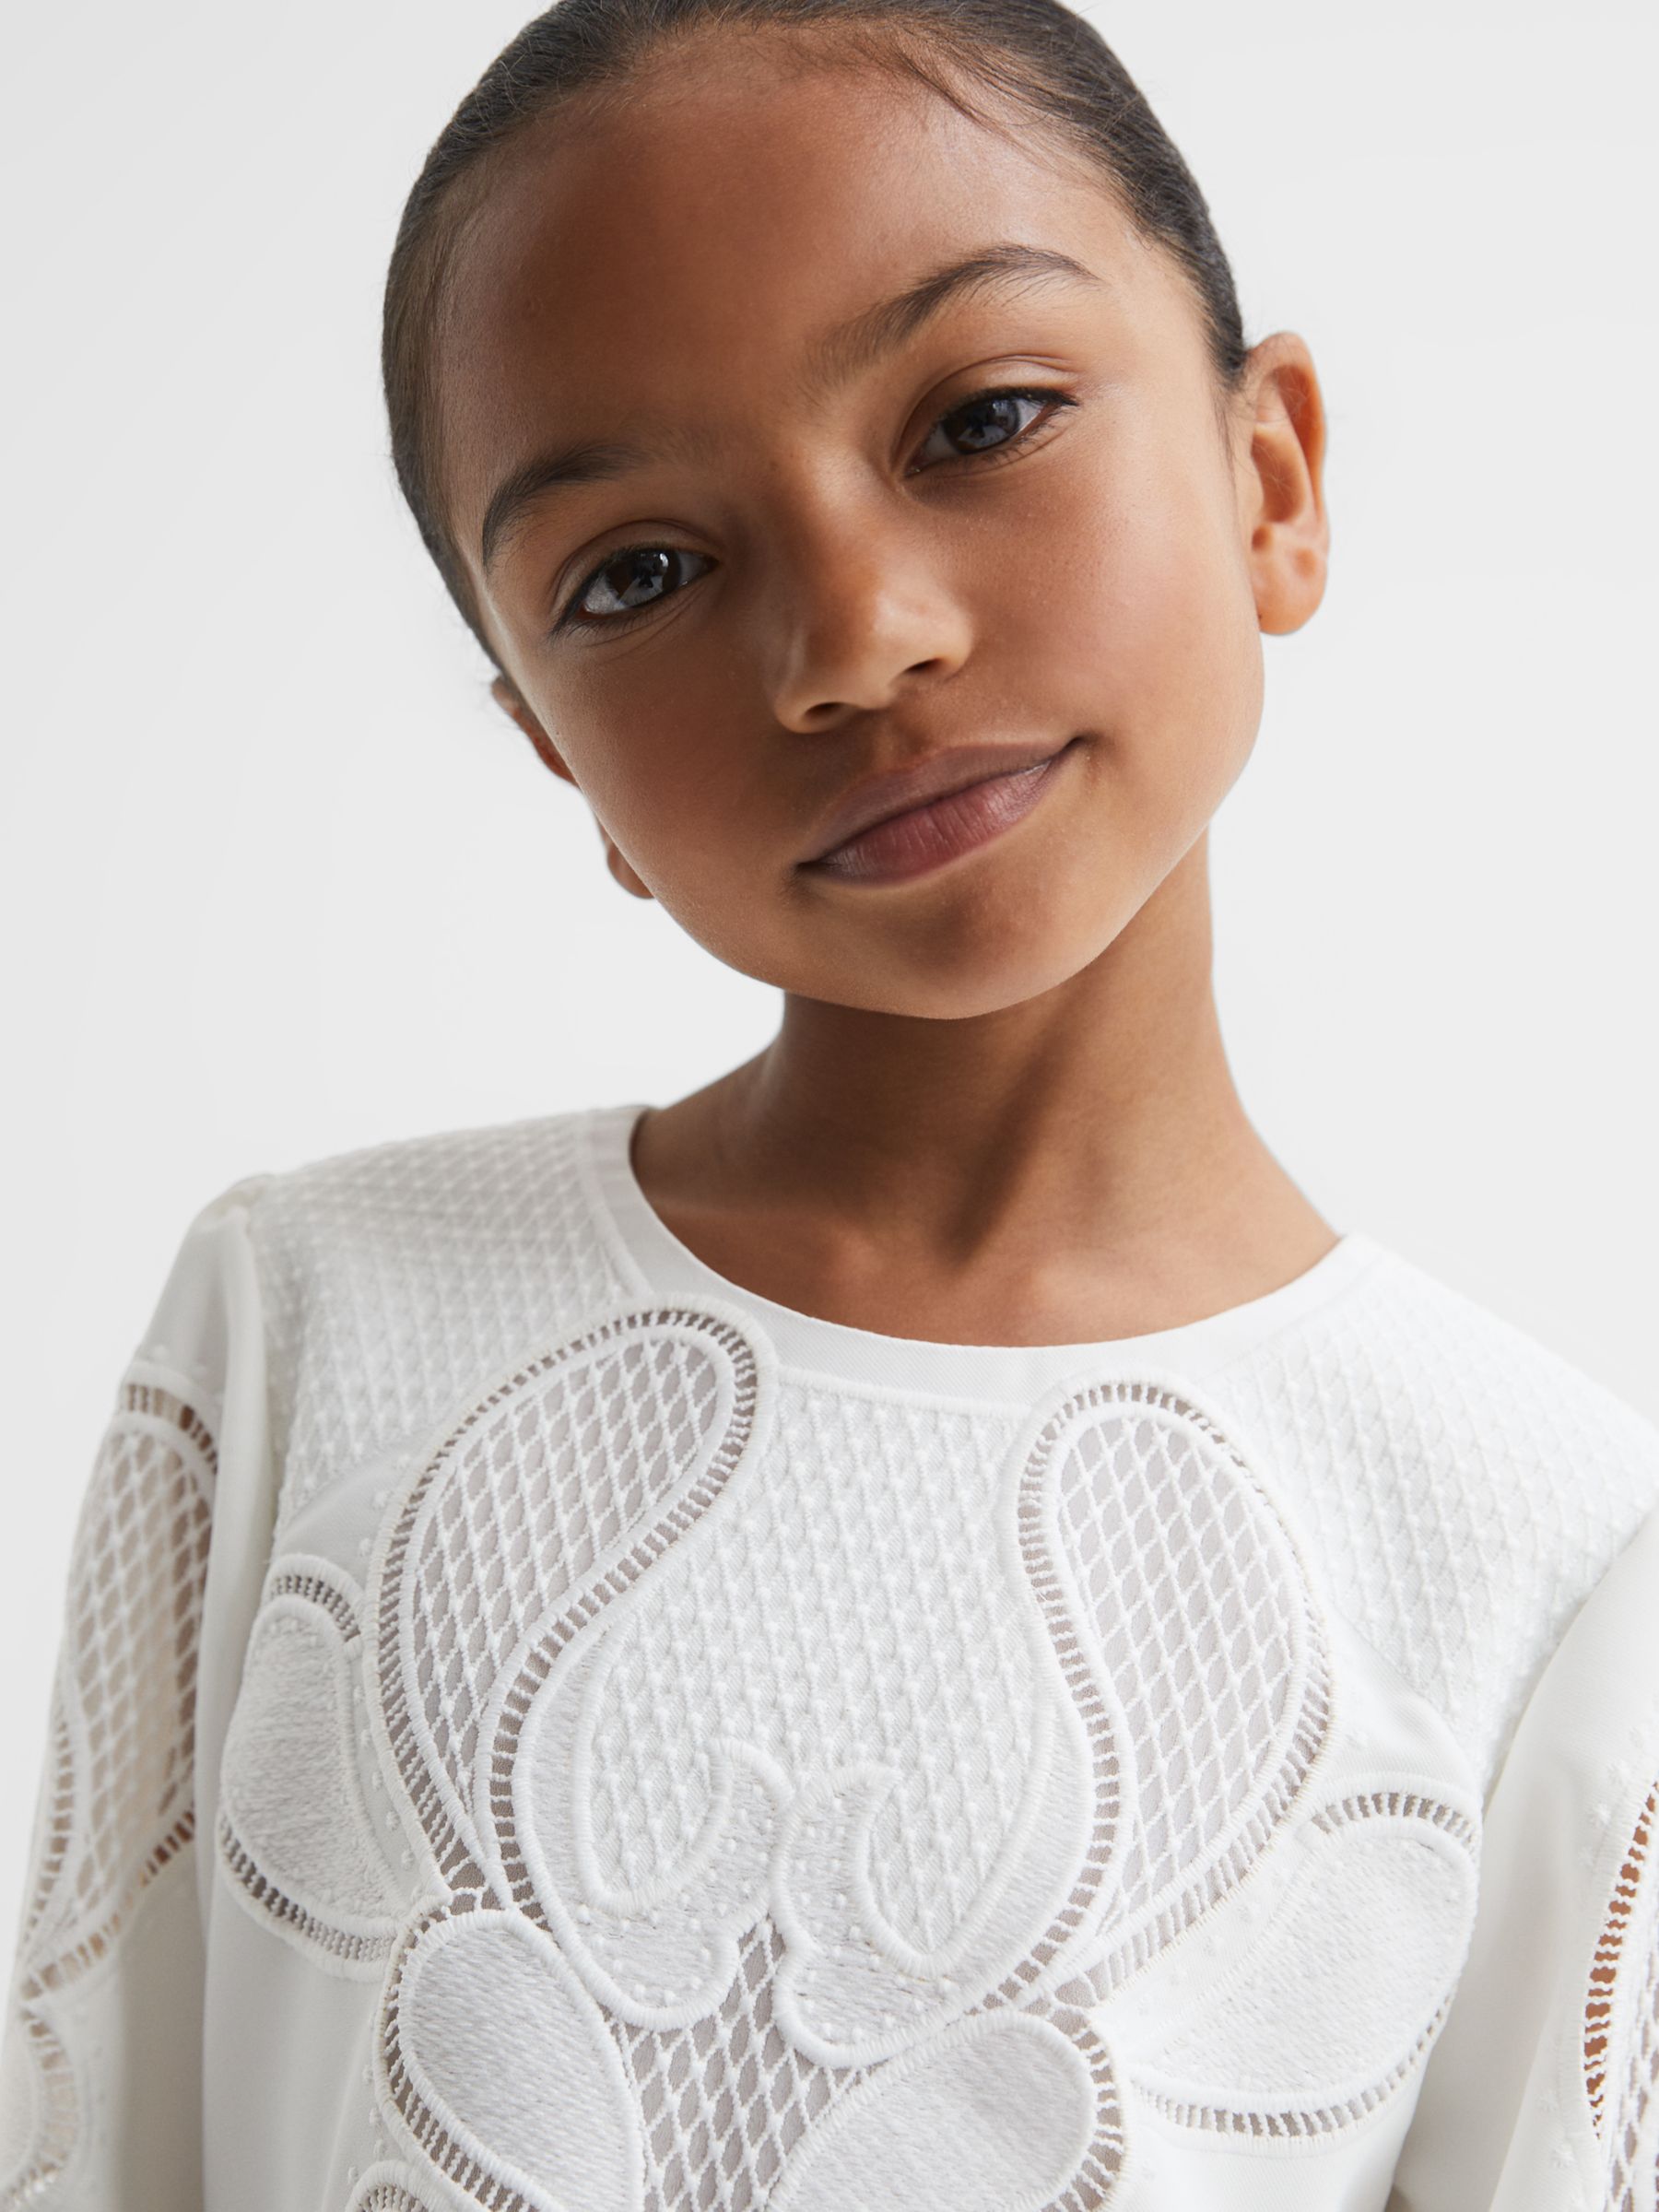 Reiss Kids' Toya Floral Embroidered Dress, Ivory, 11-12 years